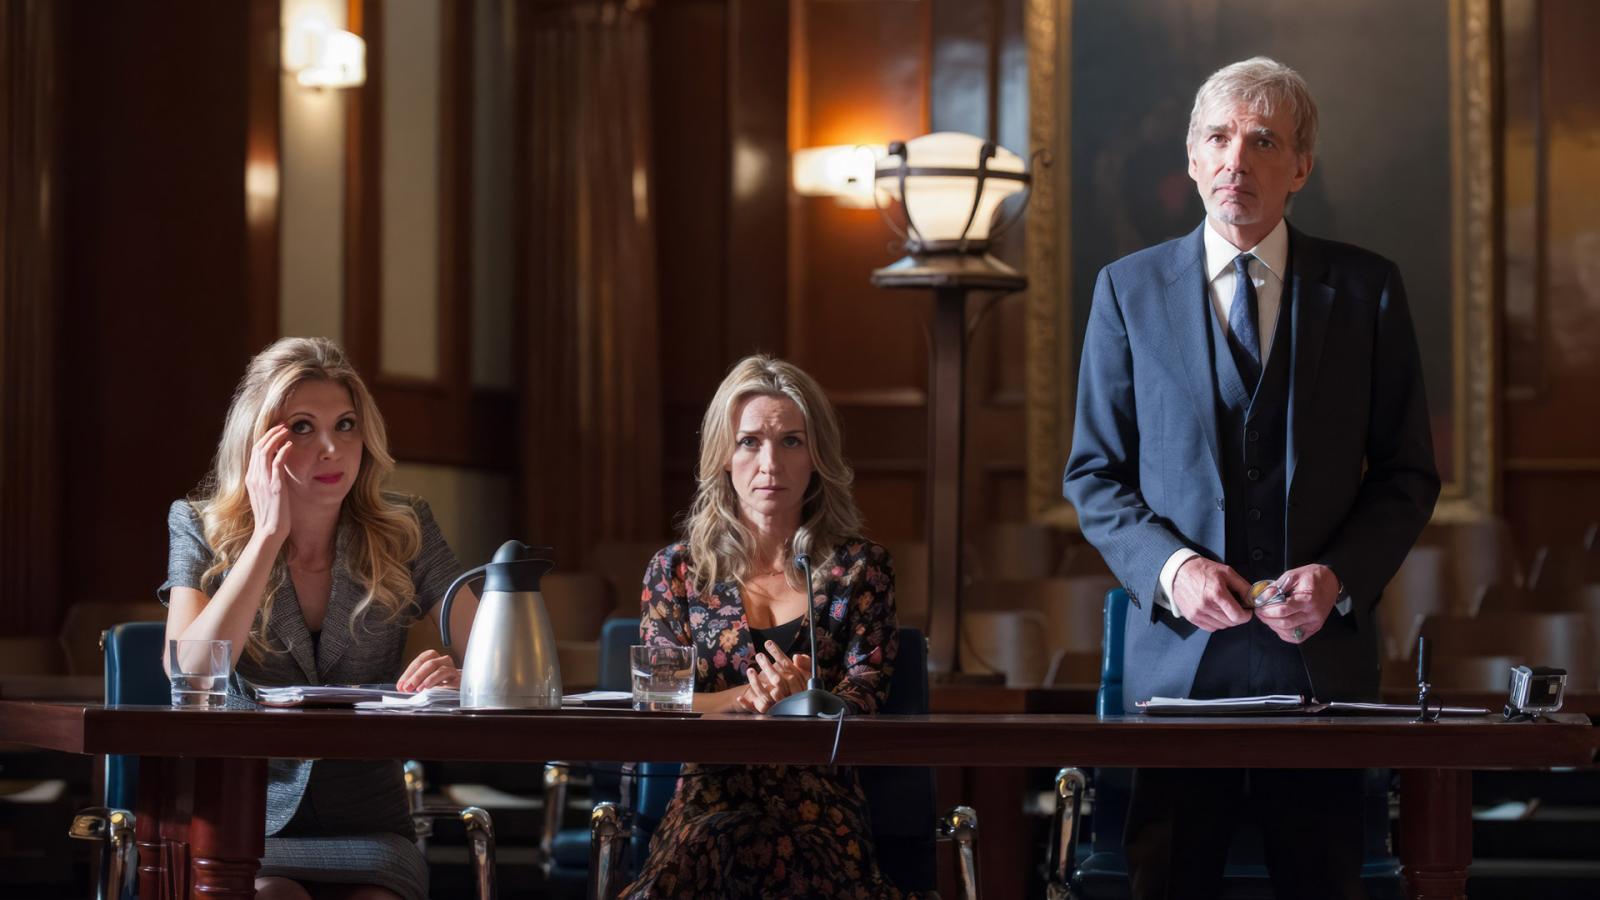 10 Shows For Law Students To Watch For Courtroom Drama - image 9